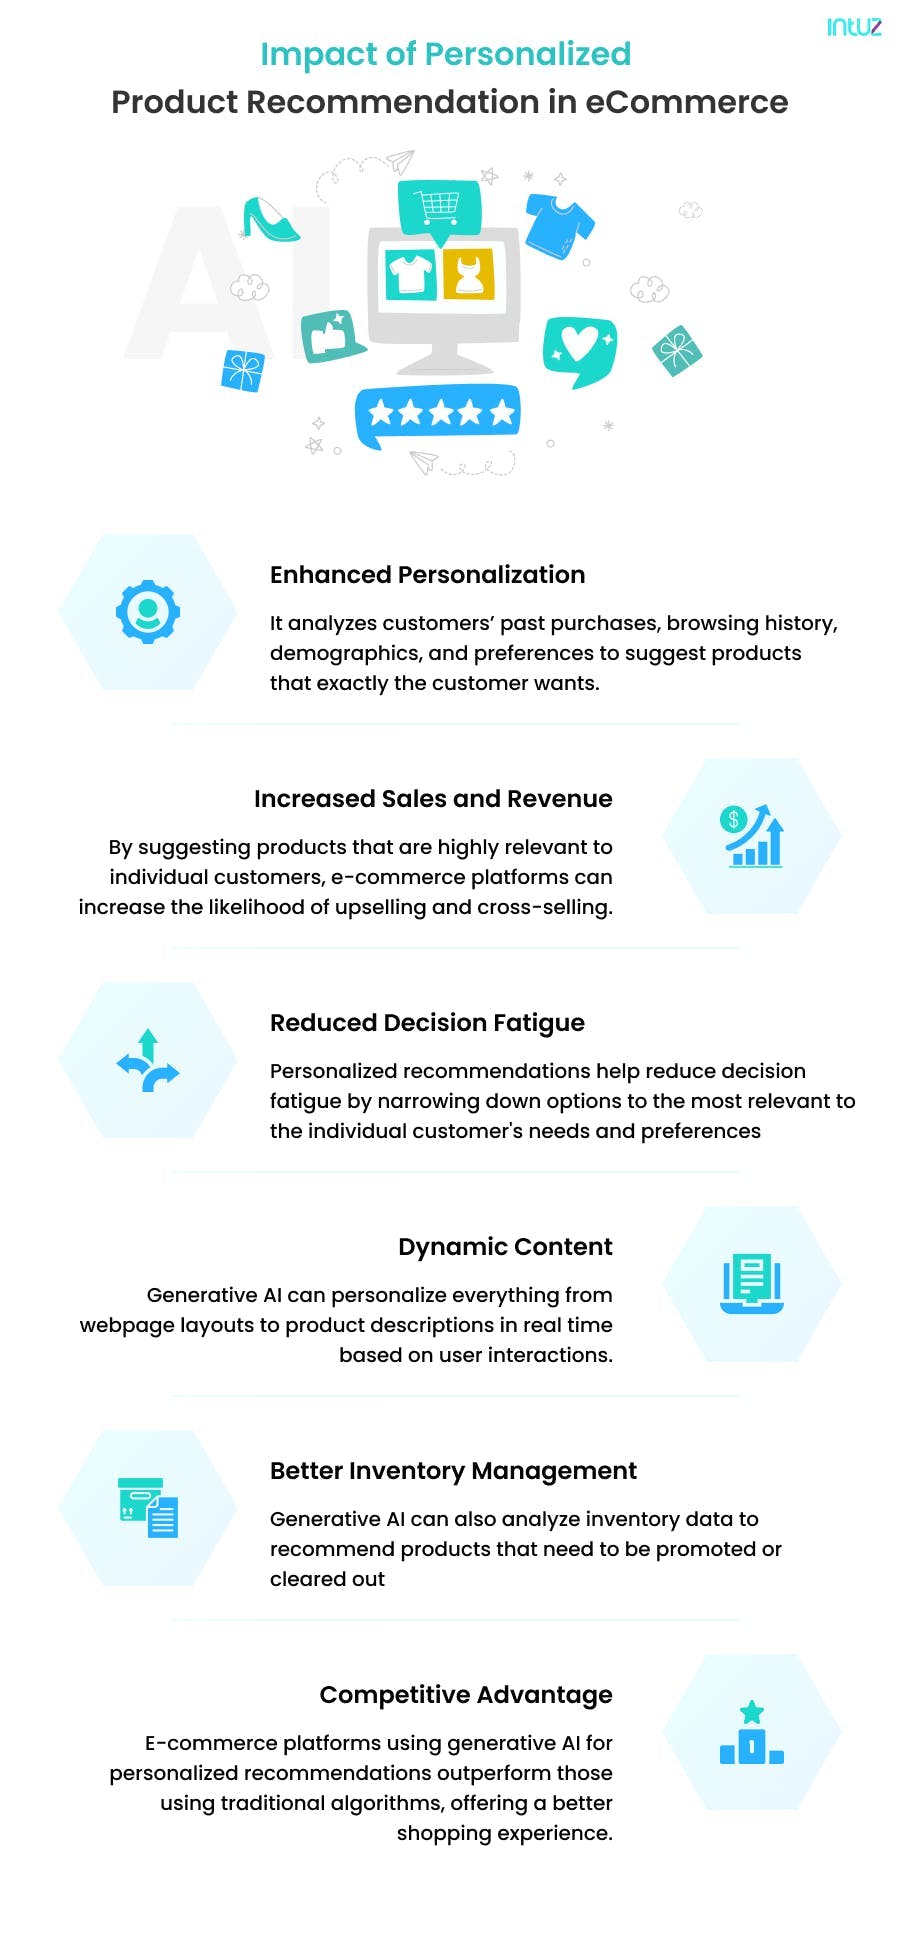 The impact of personalized product recommendation in eCommerce